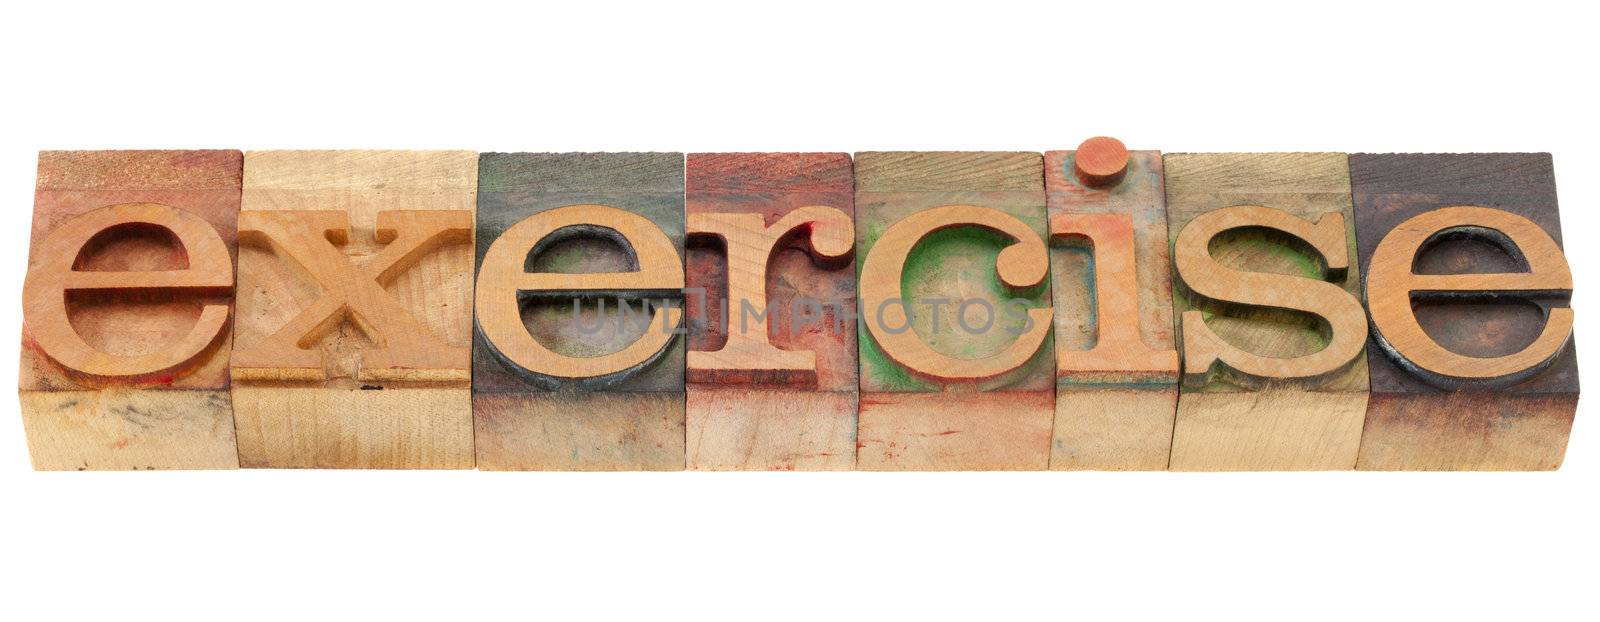 exercise word in vintage wood letterpress printing blocks, isolated on white